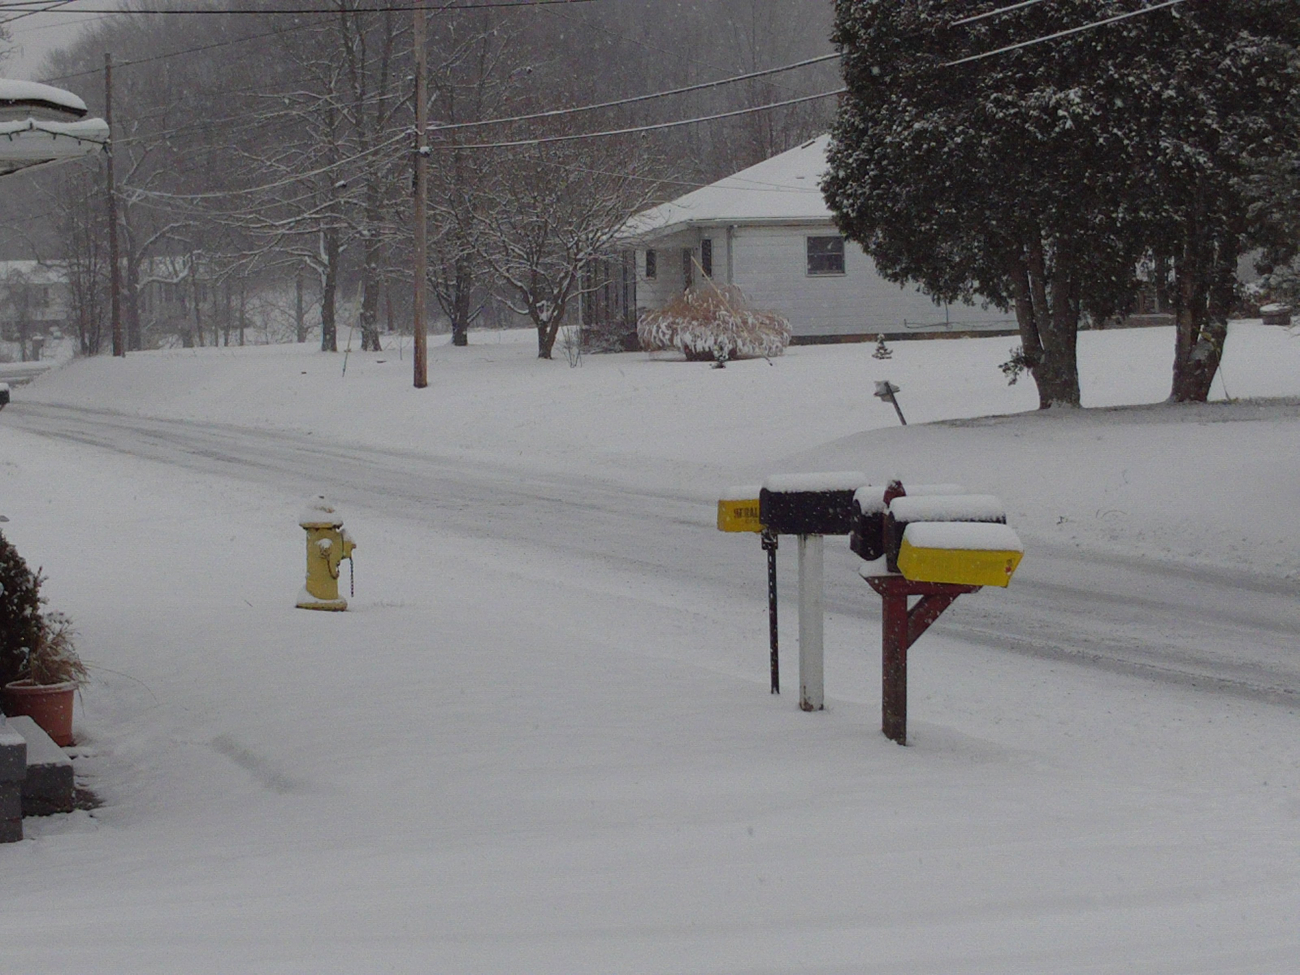 Same fire hydrant as in image wea03847 following moderate late January snow